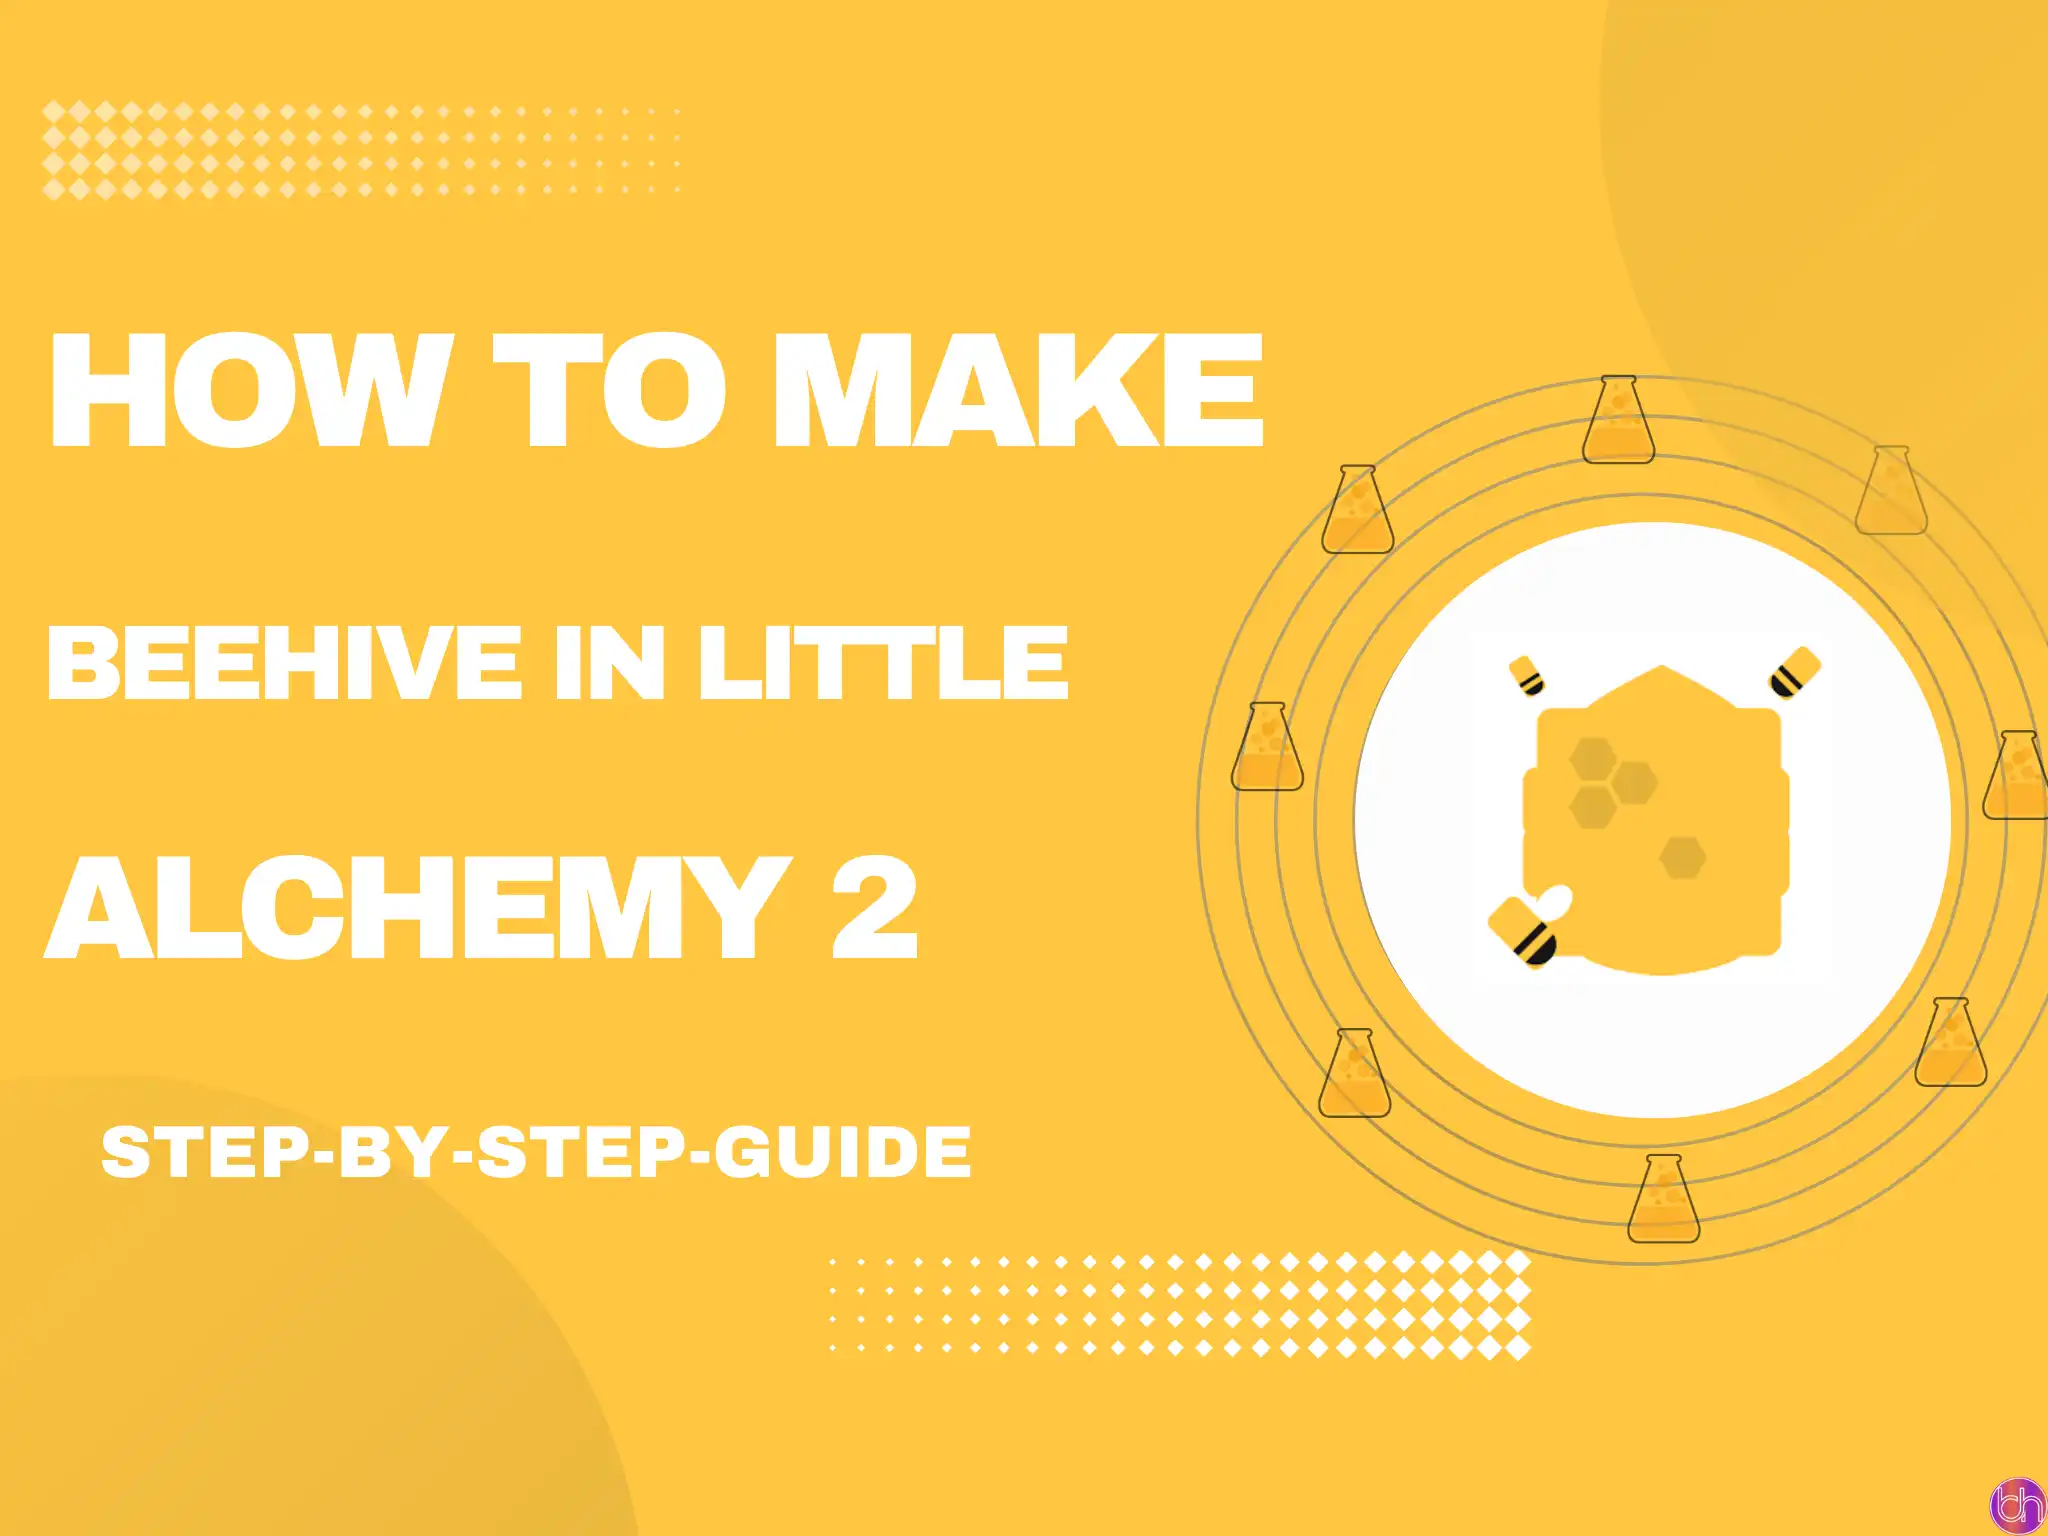 How to make Beehive in Little Alchemy 2